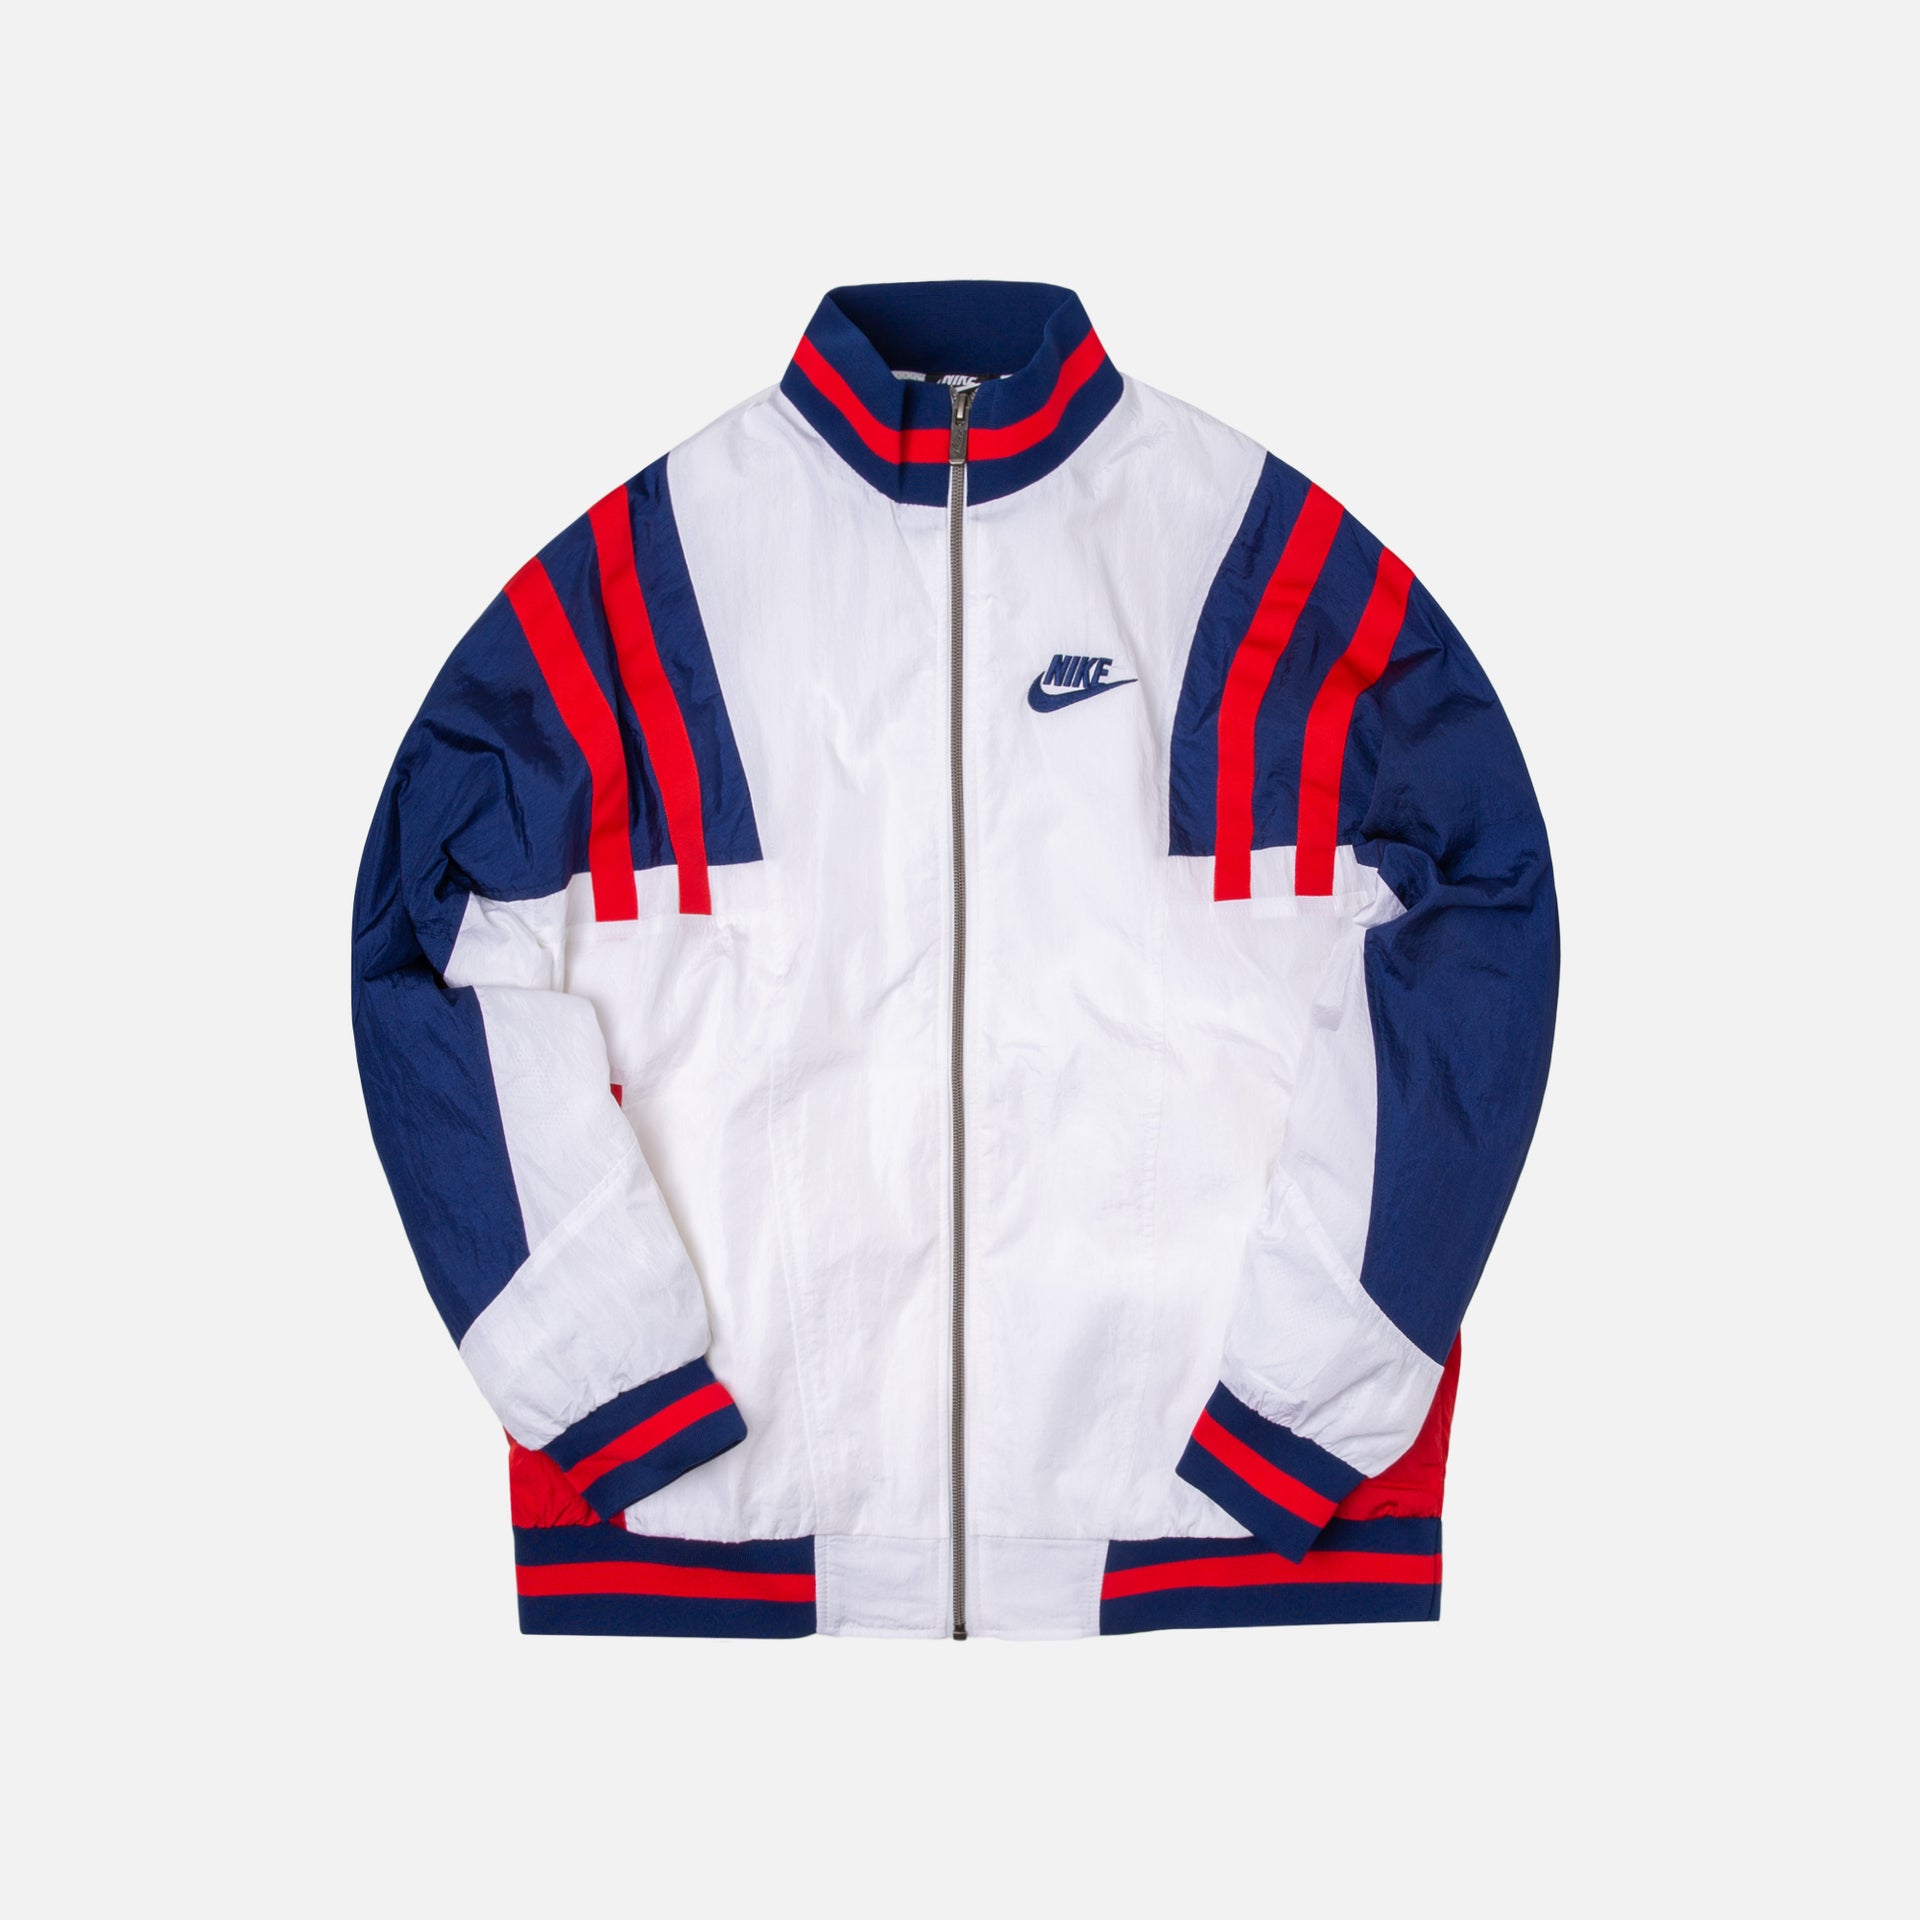 Nike Woven Re-issue Jacket - White / Blue / Red